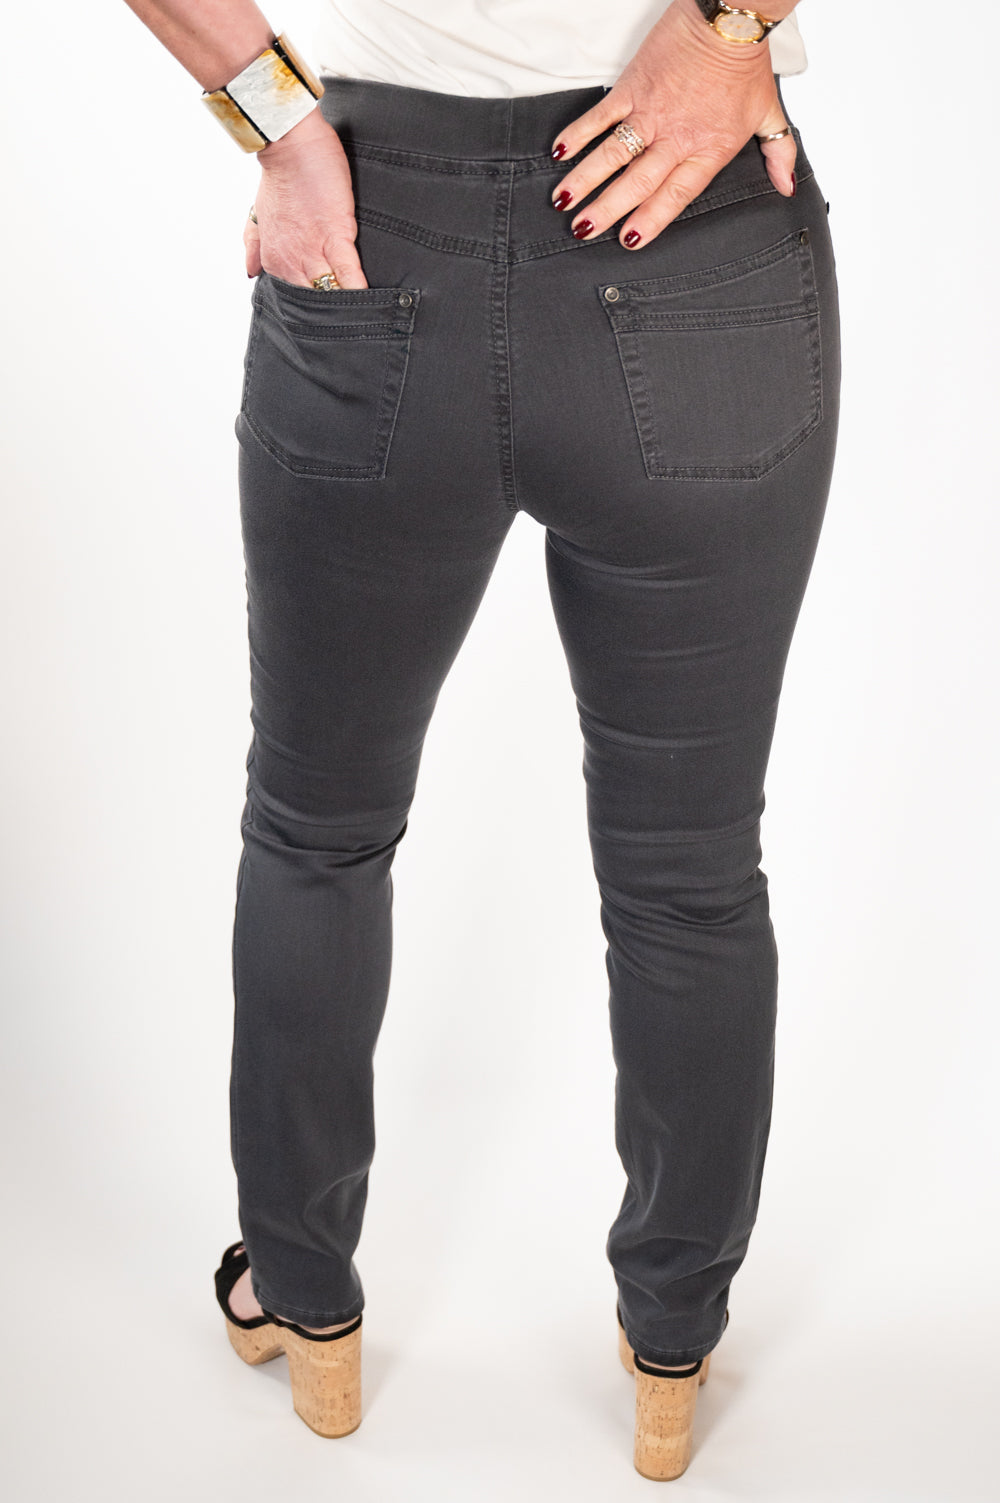 Anna Montana Jump In Jeans - Charcoal 1001